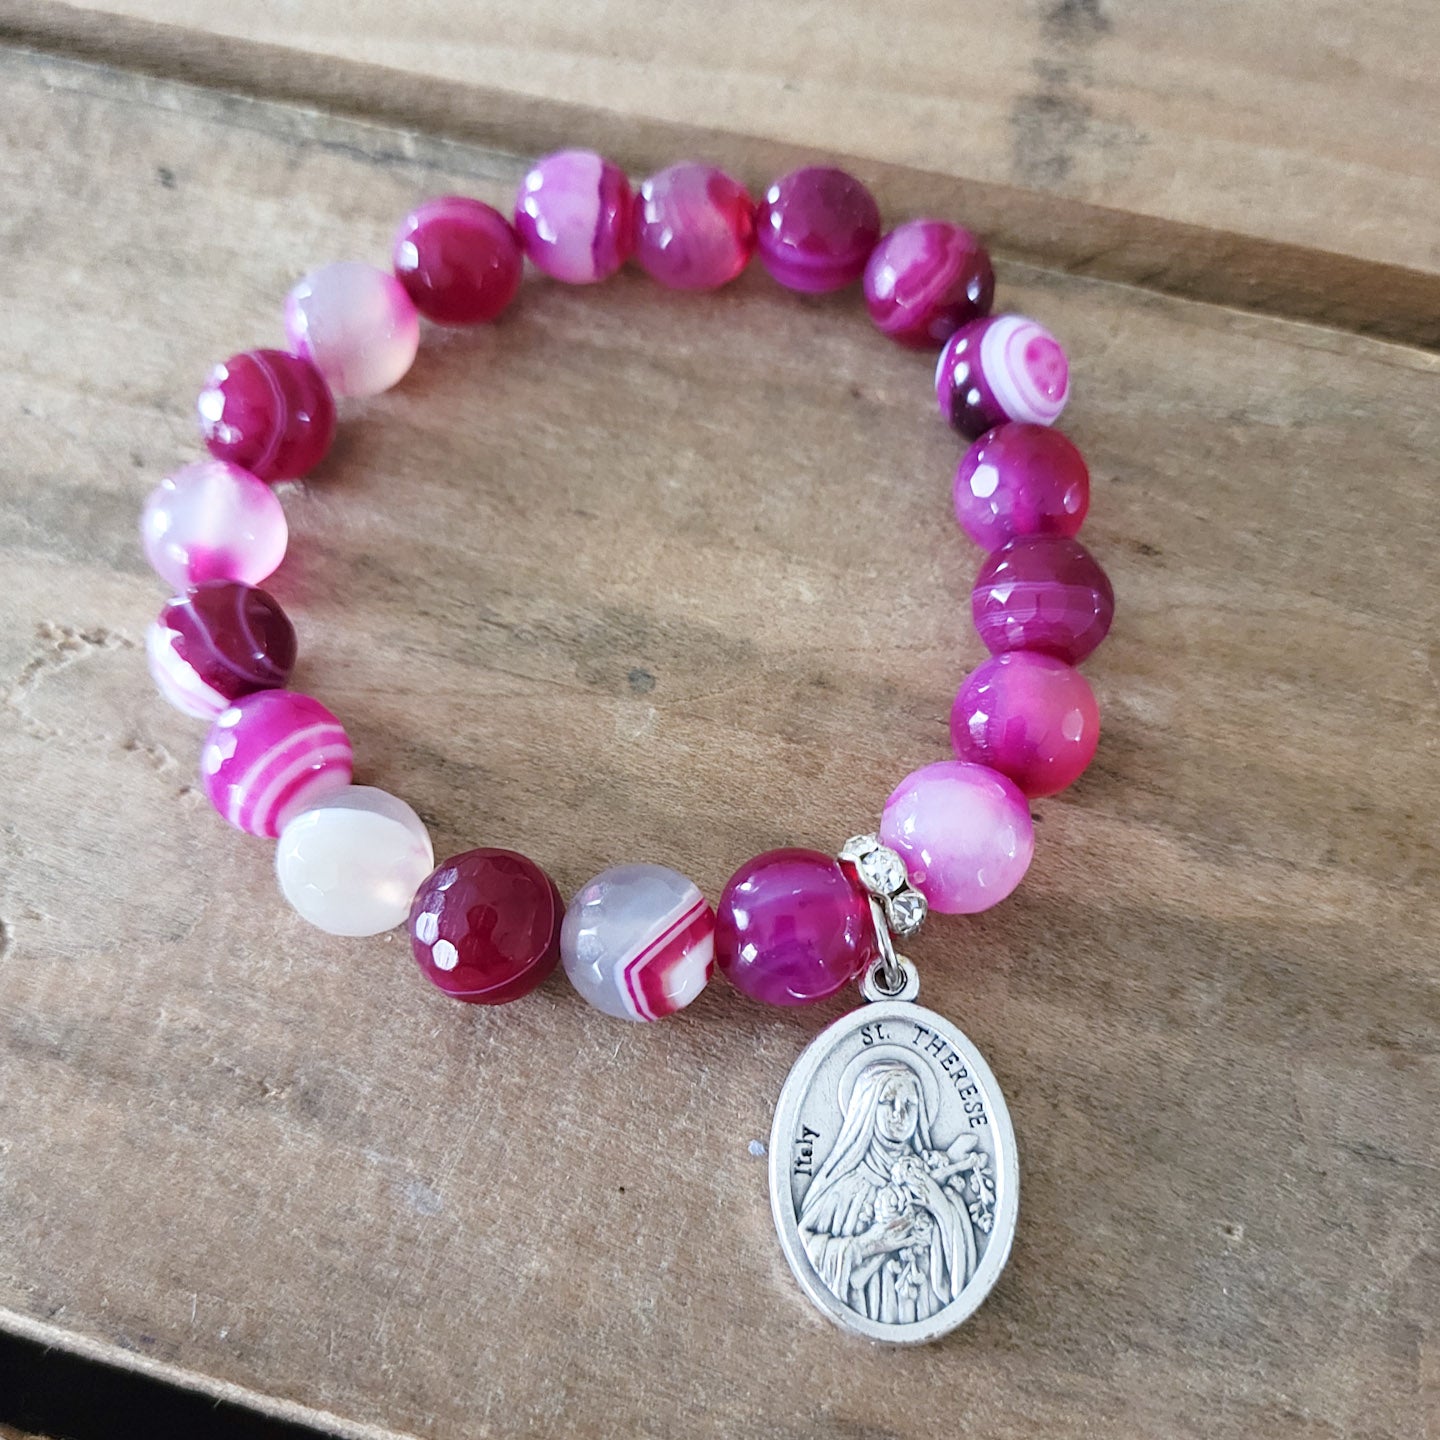 St. Therese medal 10mm hot pink agate beads stretch bracelet